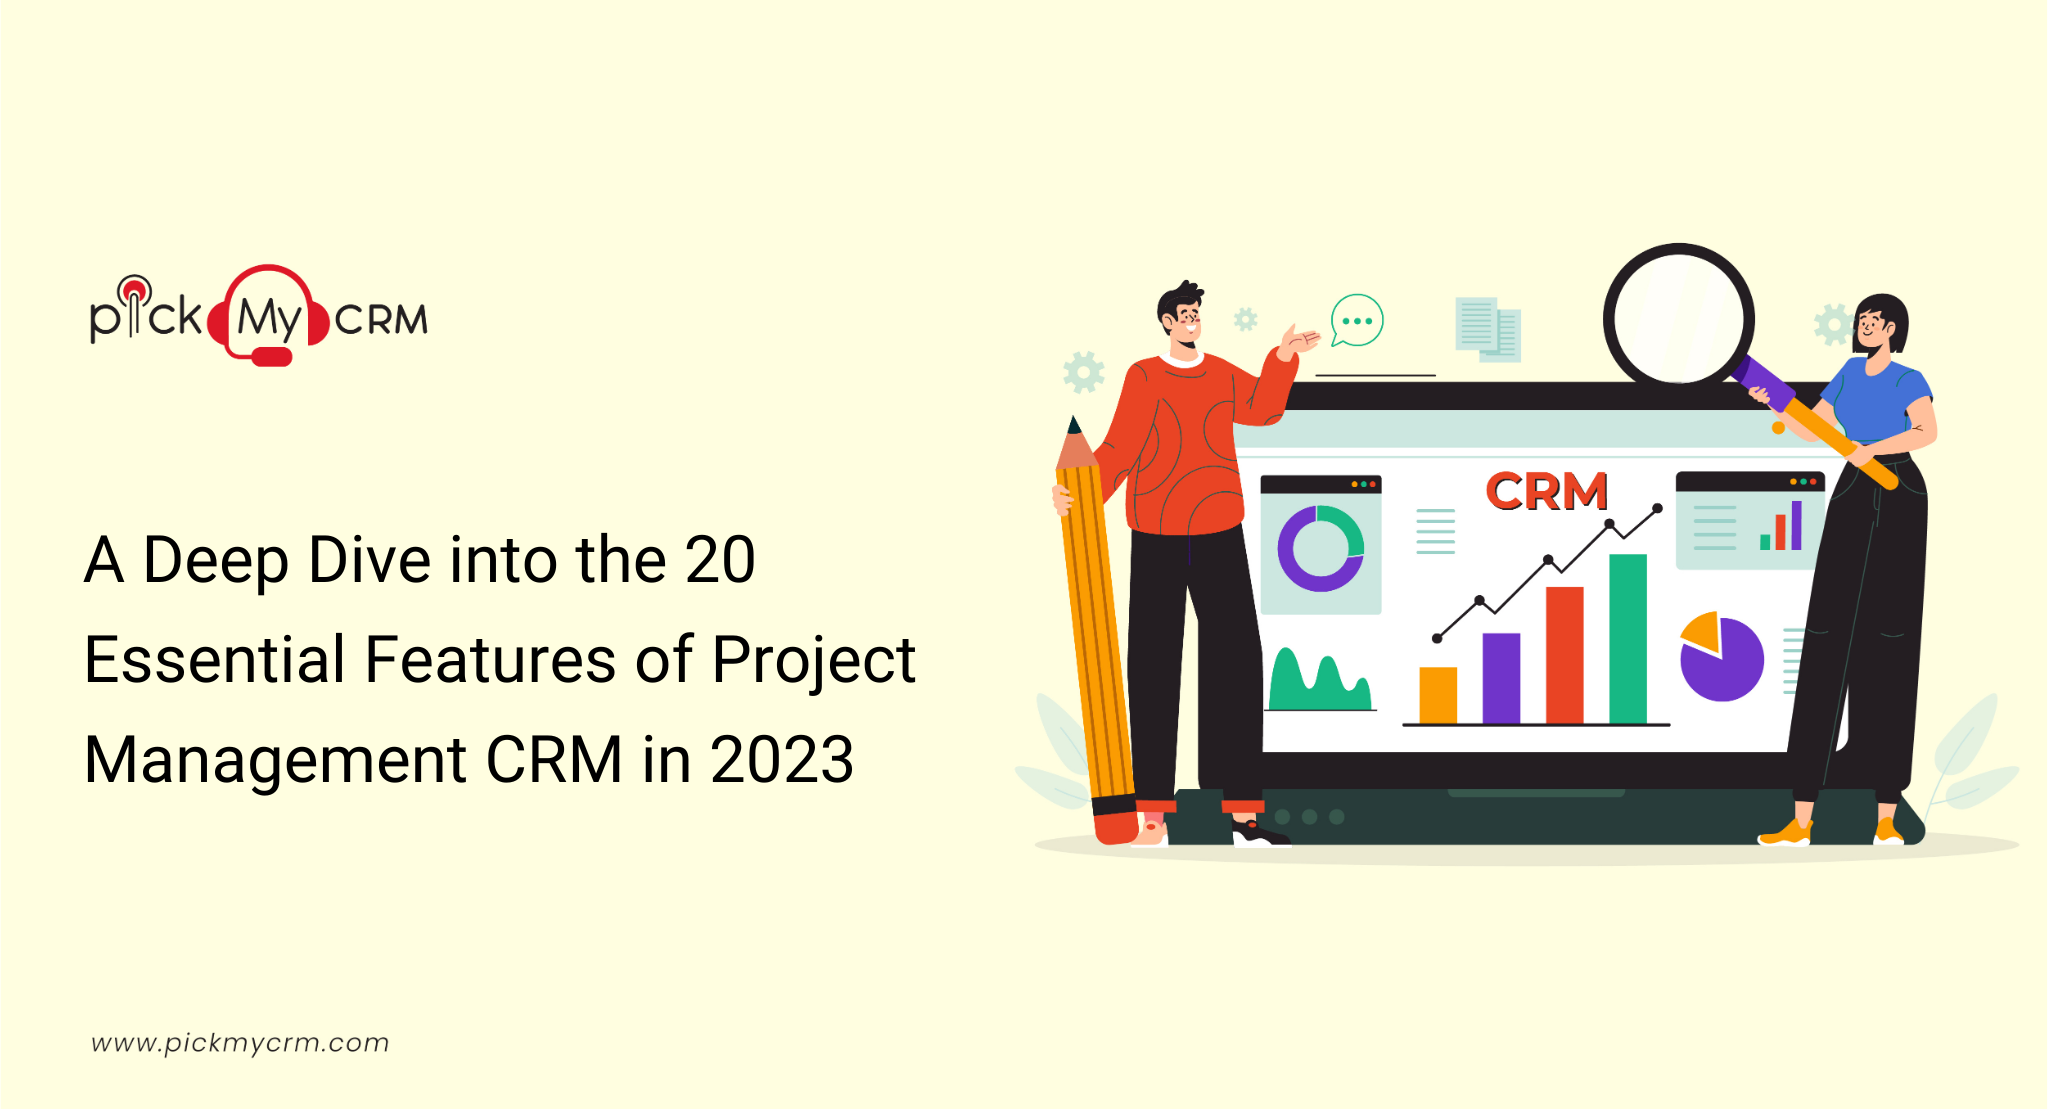 A Deep Dive into the 20 Essential Features of Project Management CRM in 2023